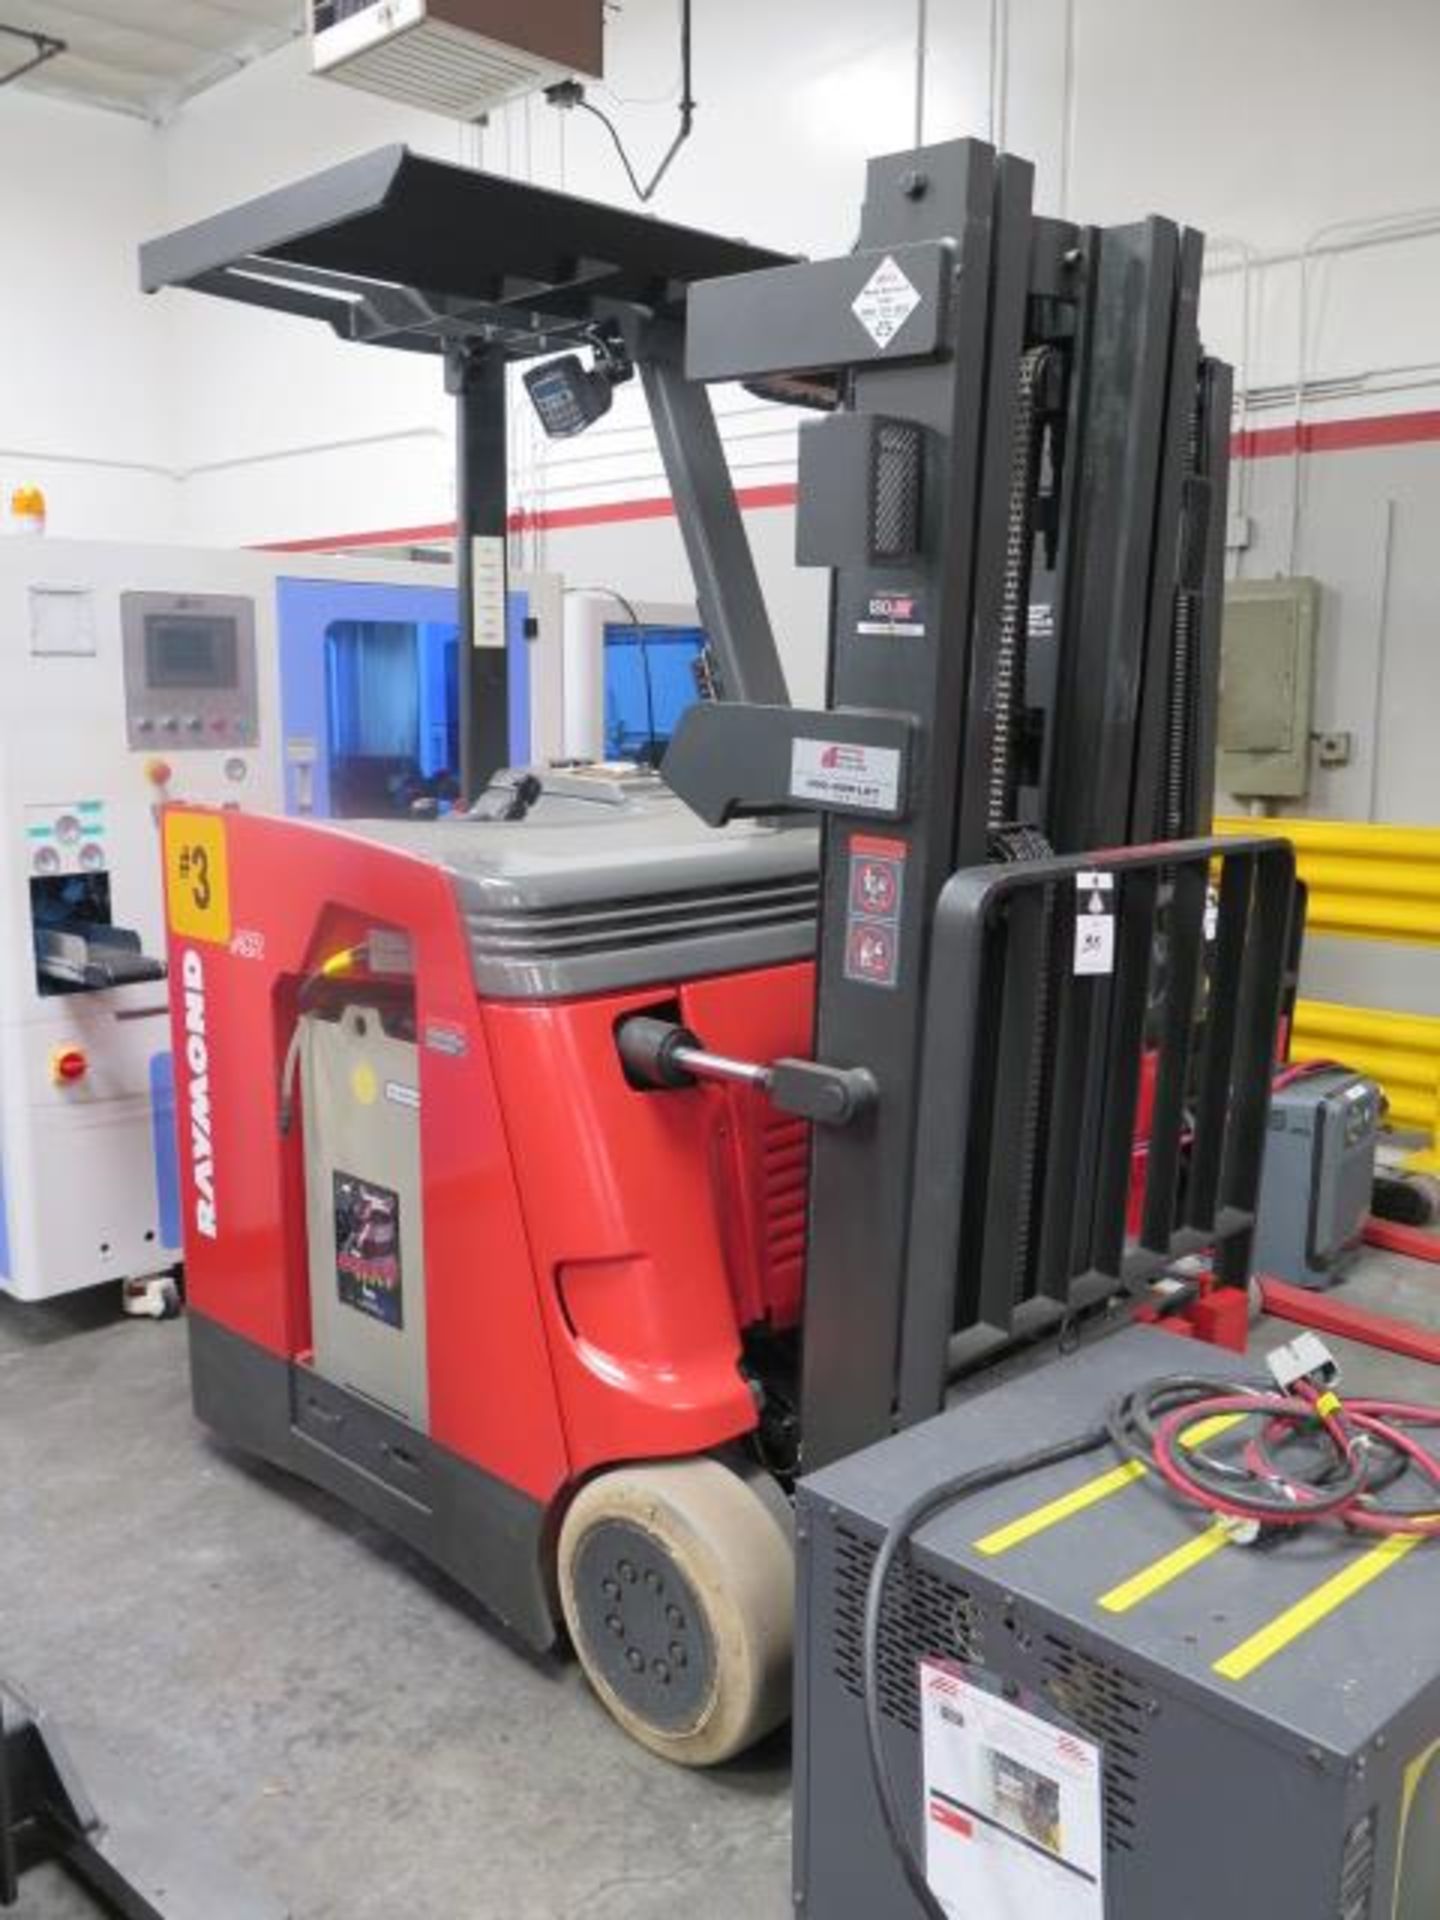 Raymond 410-C35TT 3500 Lb Cap Short Mast Stand-In Electric Pallet Mover s/n 410-08-16059, SOLD AS IS